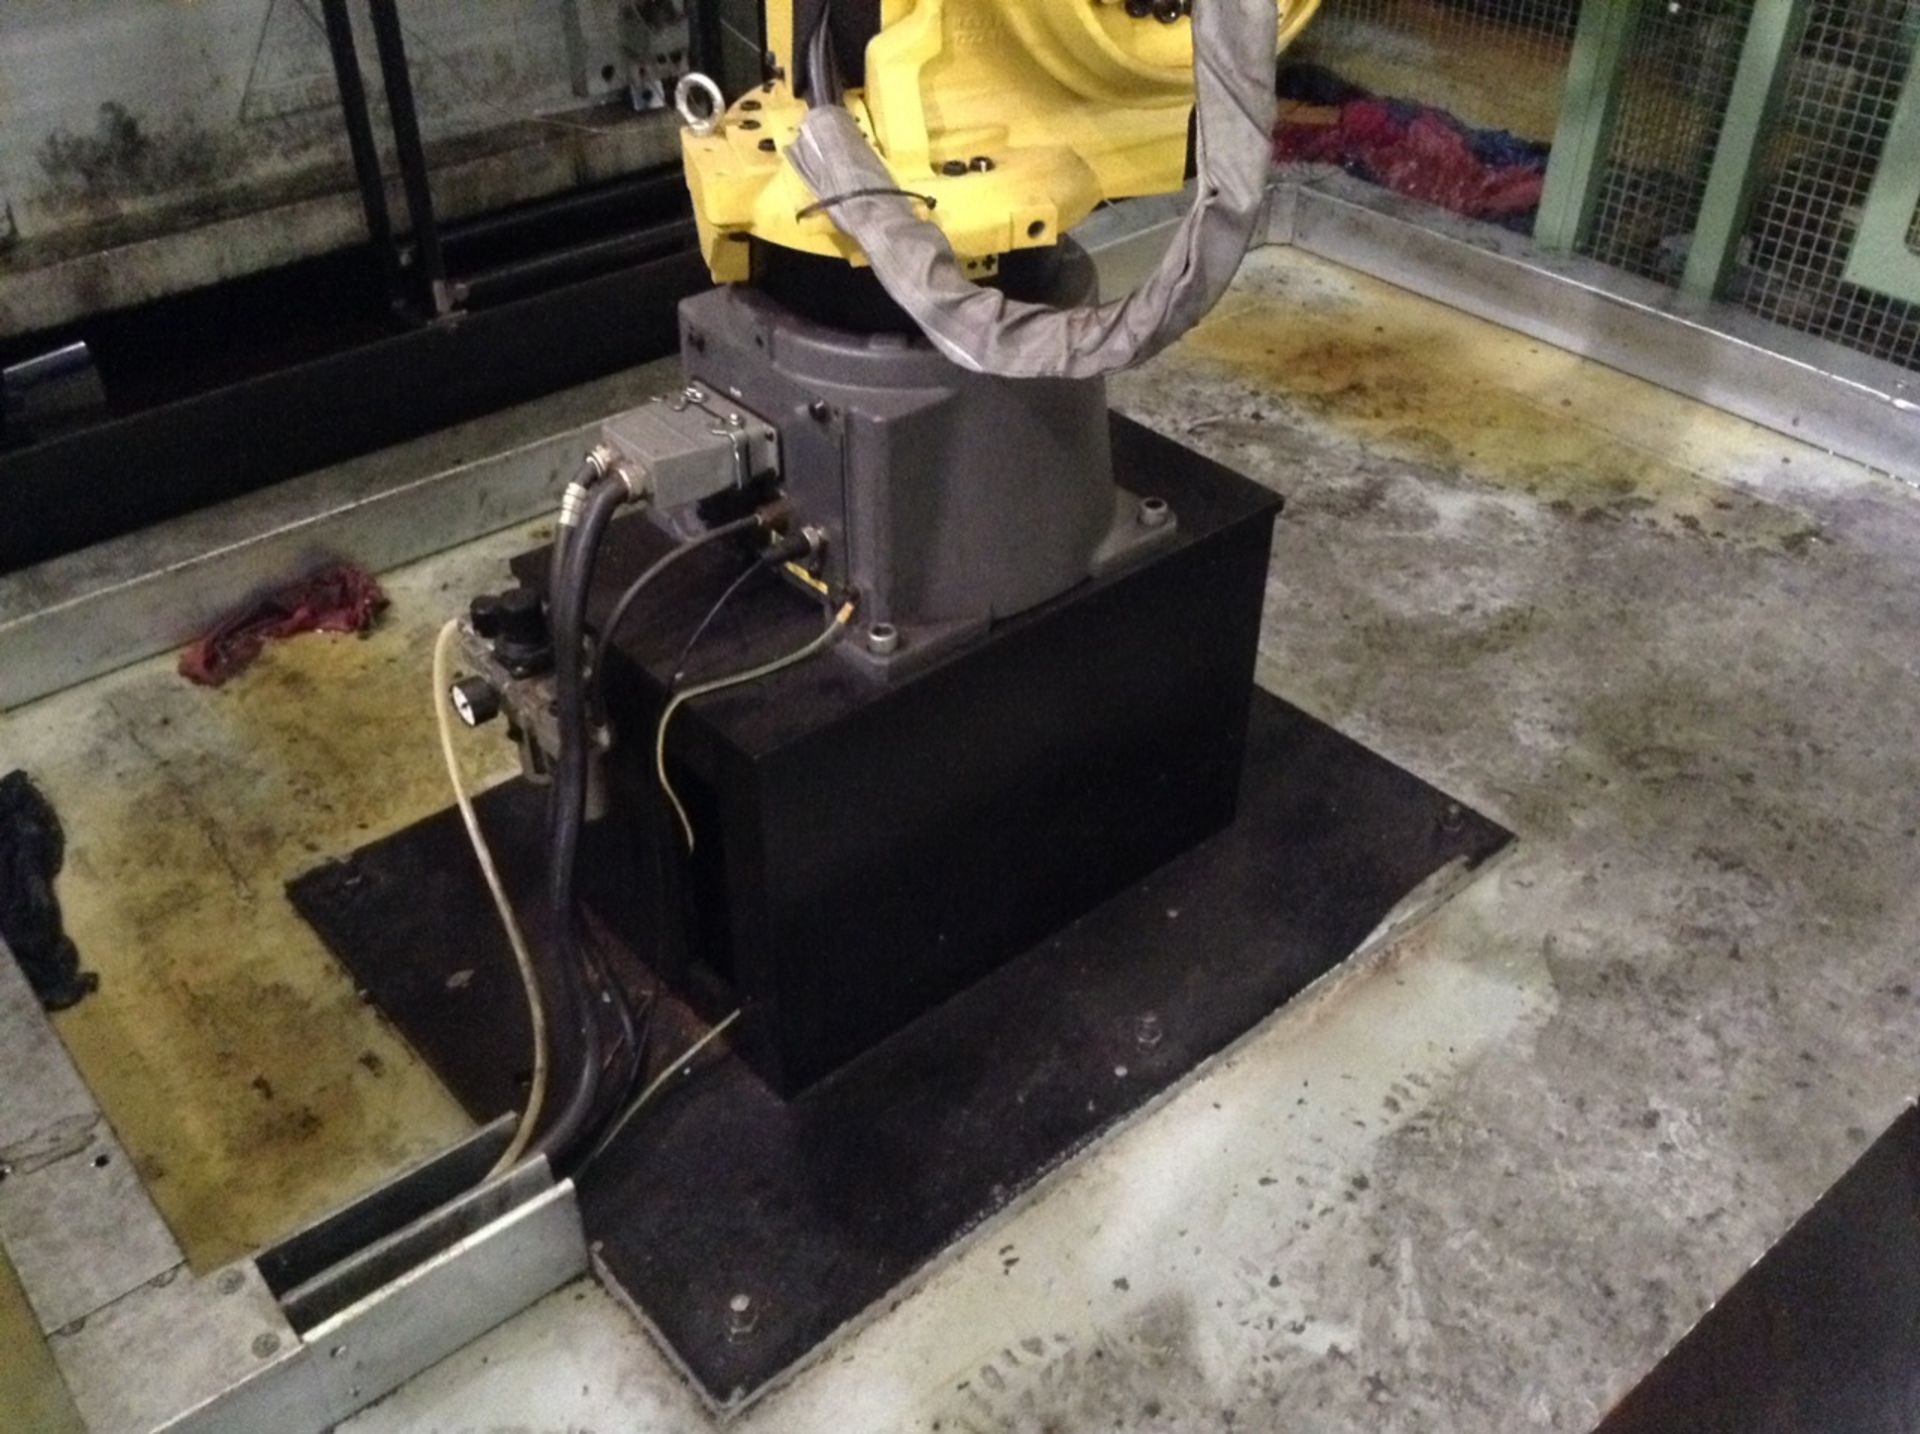 1 Fanuc , M-20iA12L , 6-axes 12kg payload Robot, floor mounted, with Controller Model R30iB And a Ke - Image 5 of 5